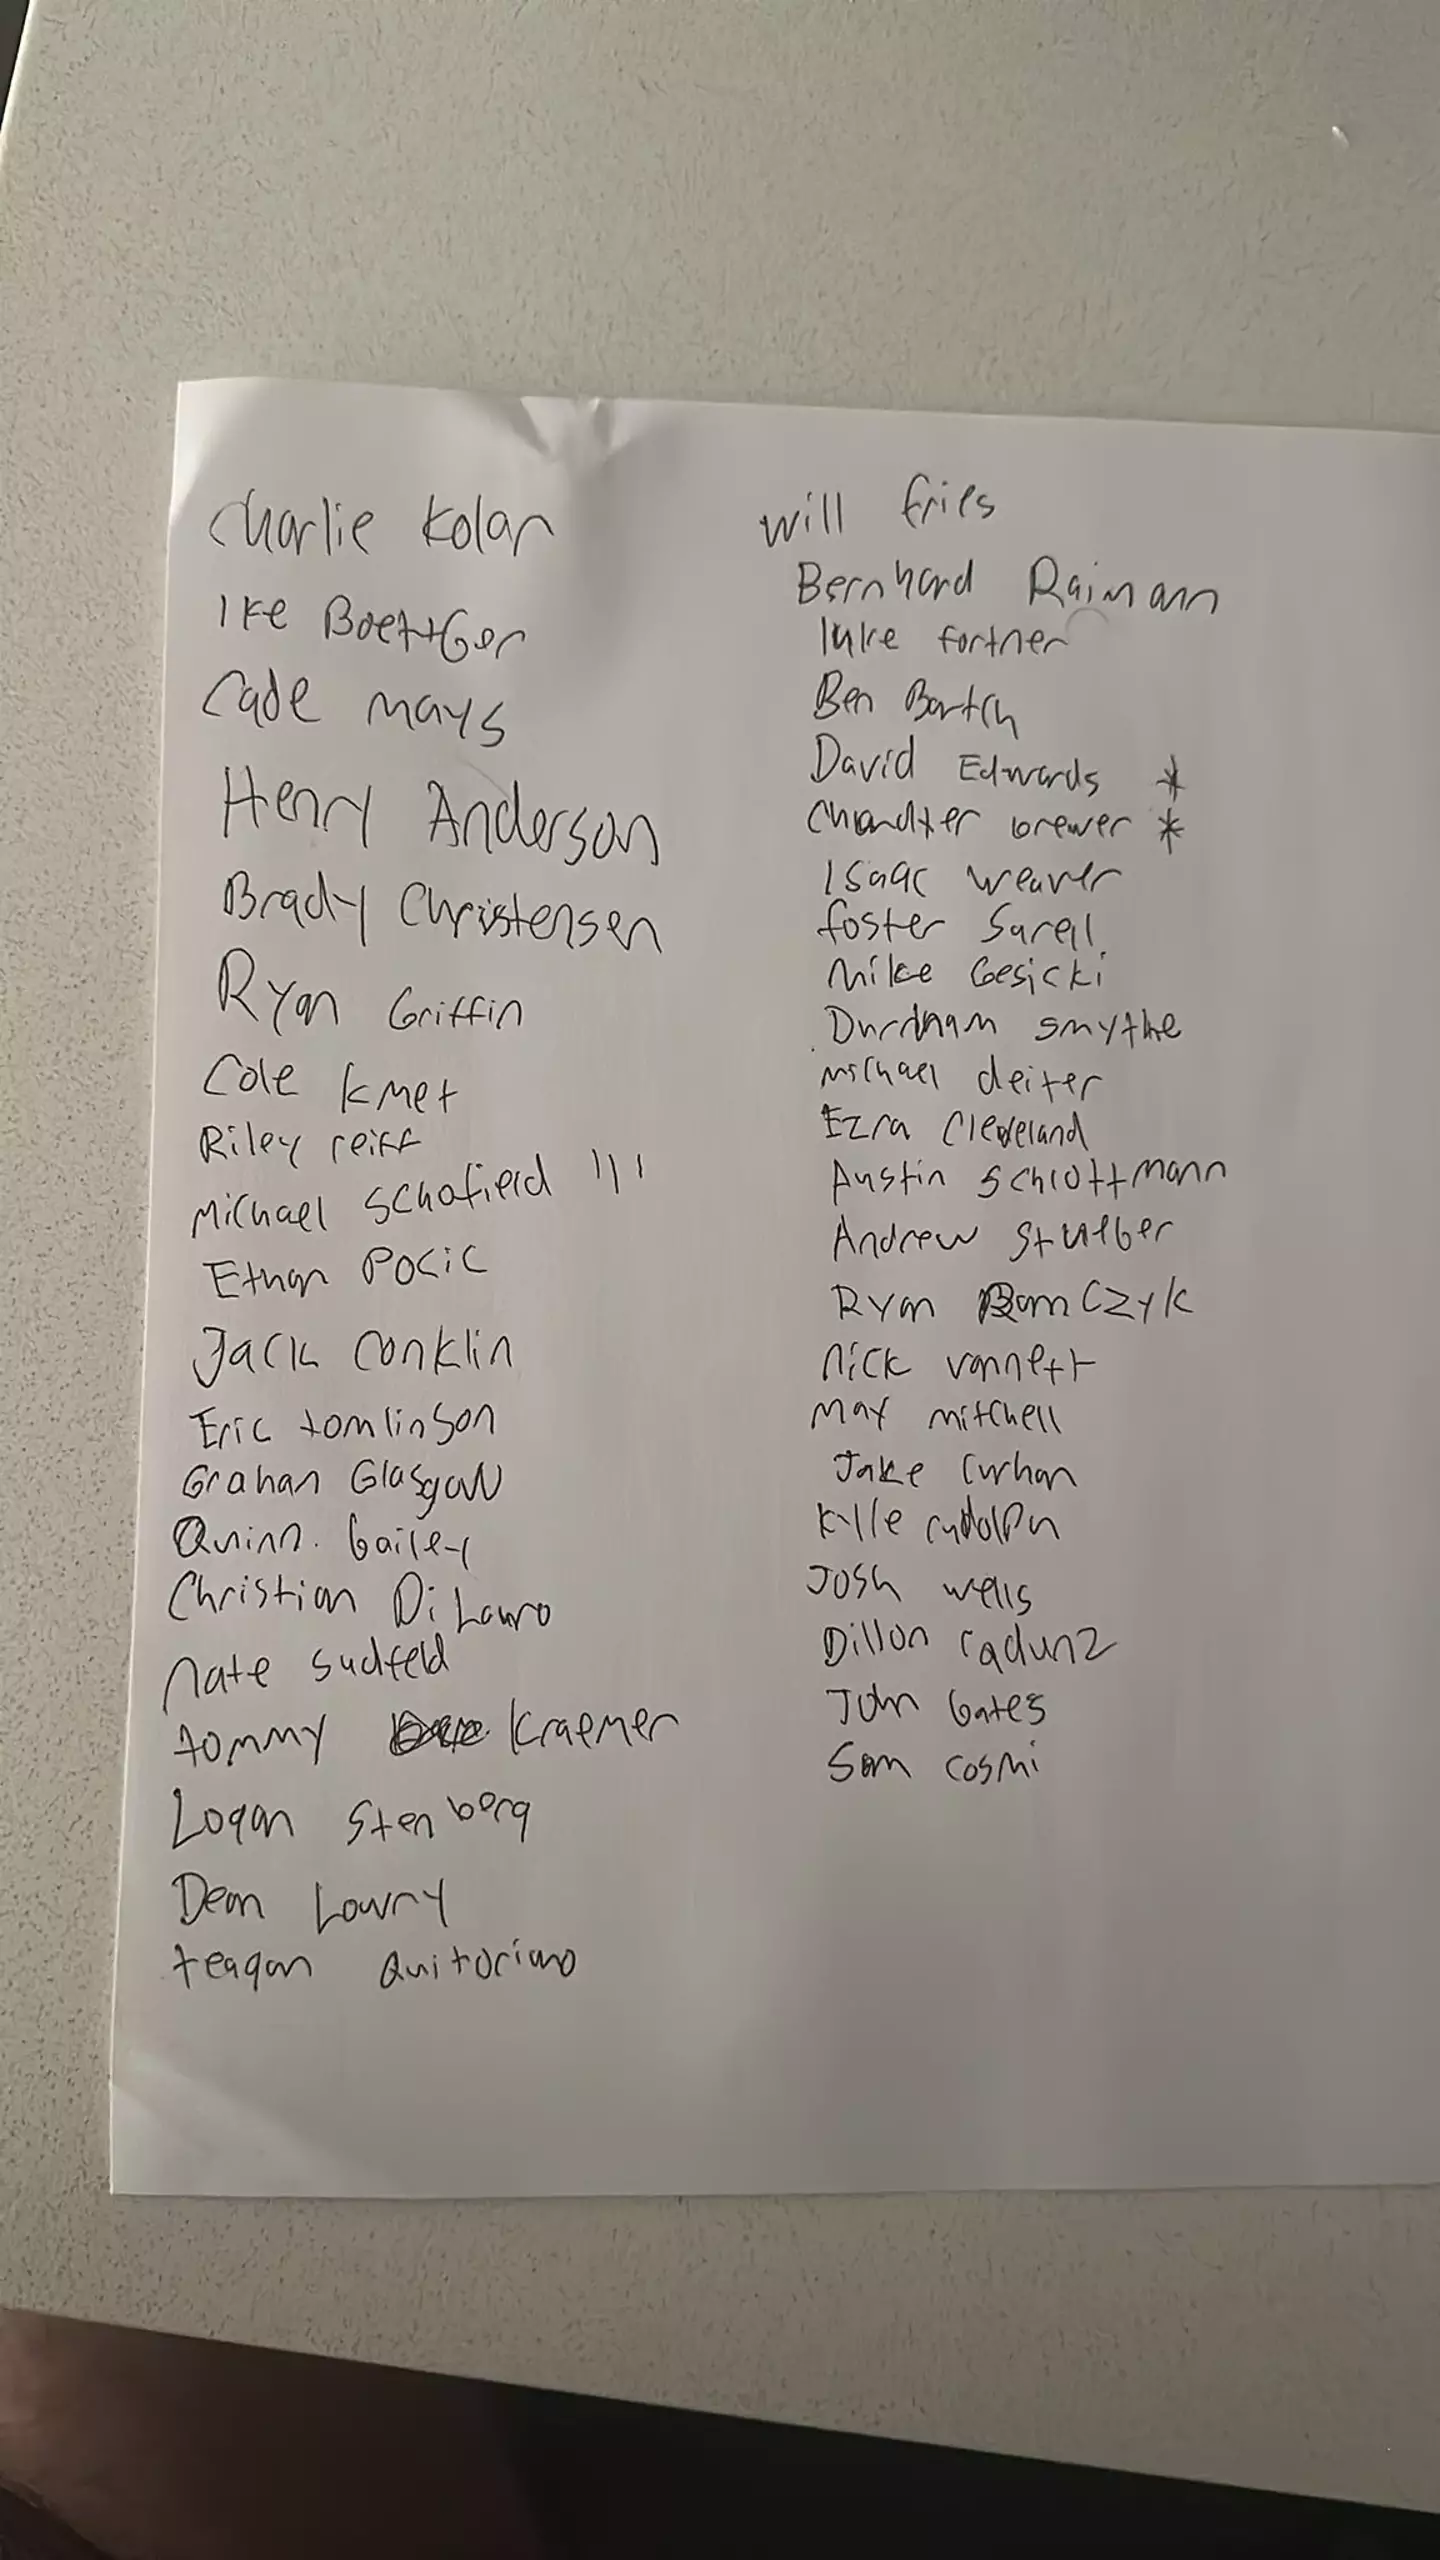 One fan made a huge list of NFL players.